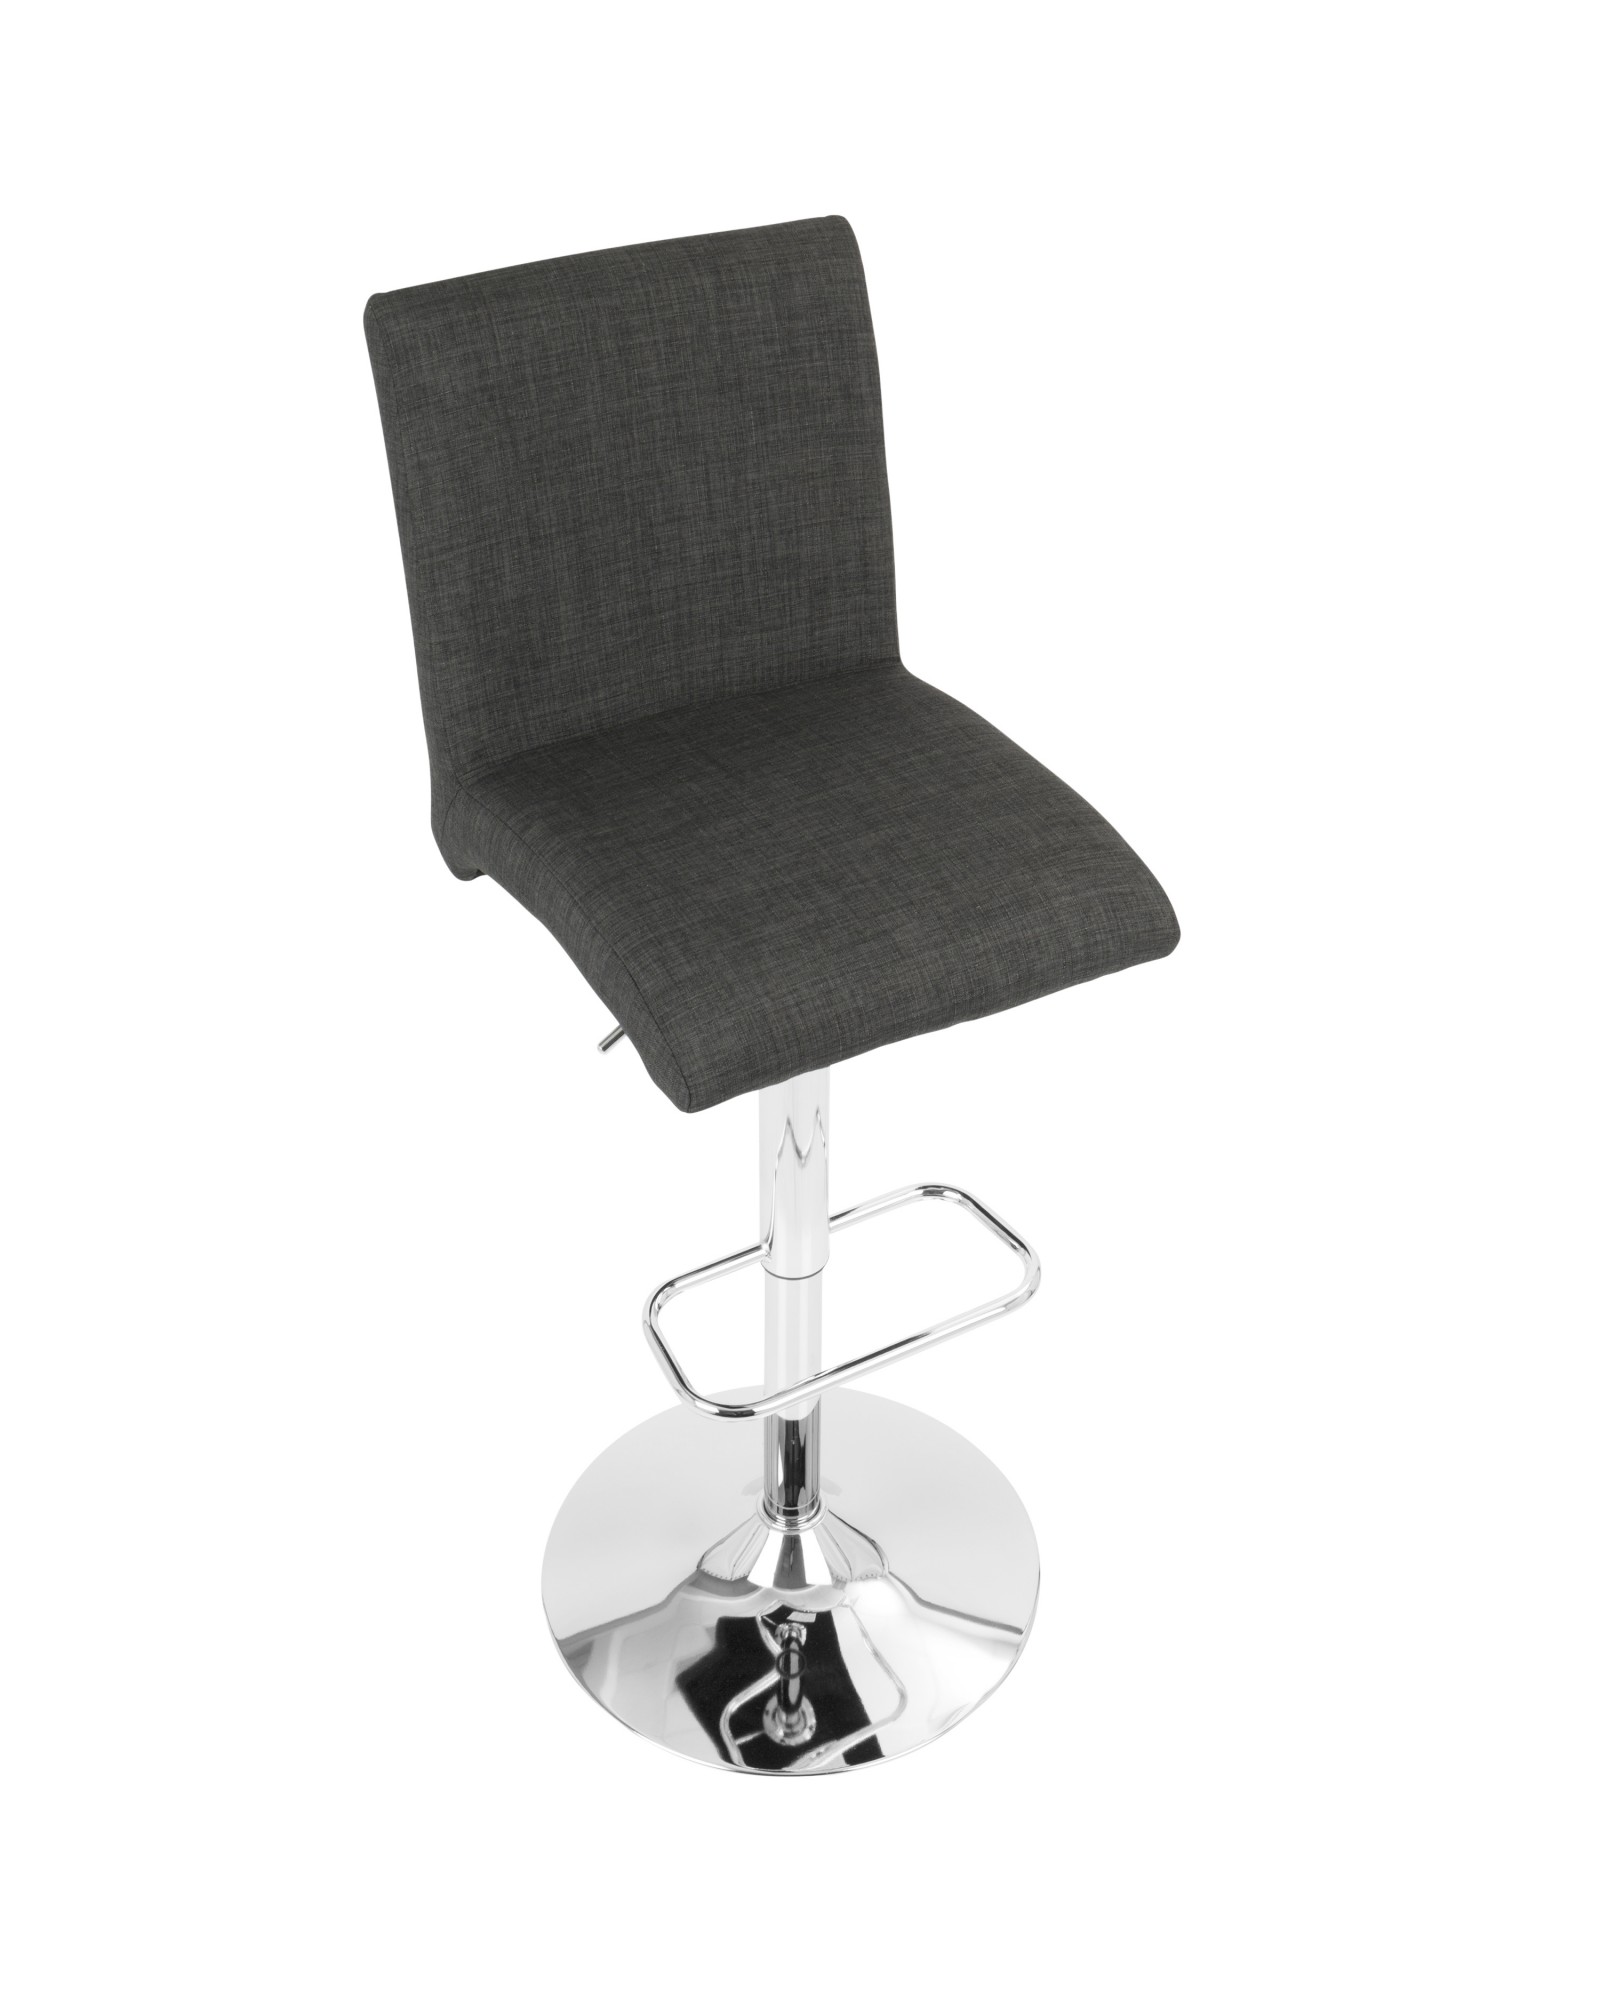 Tintori Contemporary Adjustable Barstool with Swivel in Charcoal